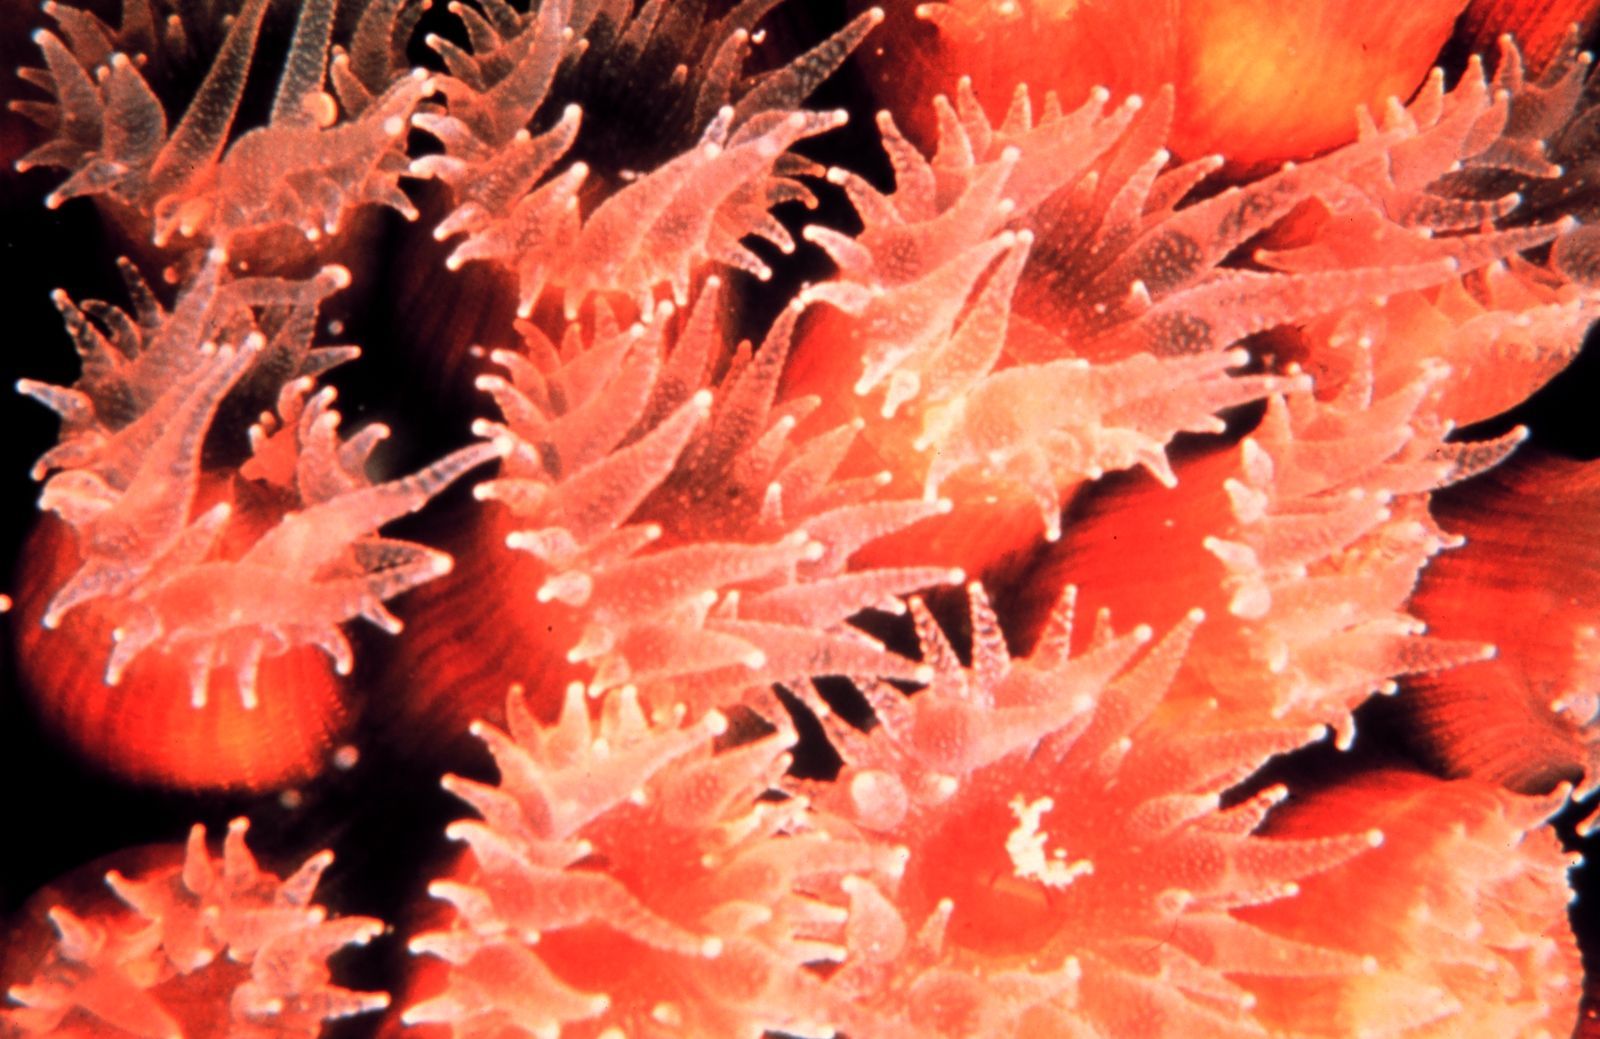 Montastrea cavernosa coral polyps by Spaully, Wikimedia Commons